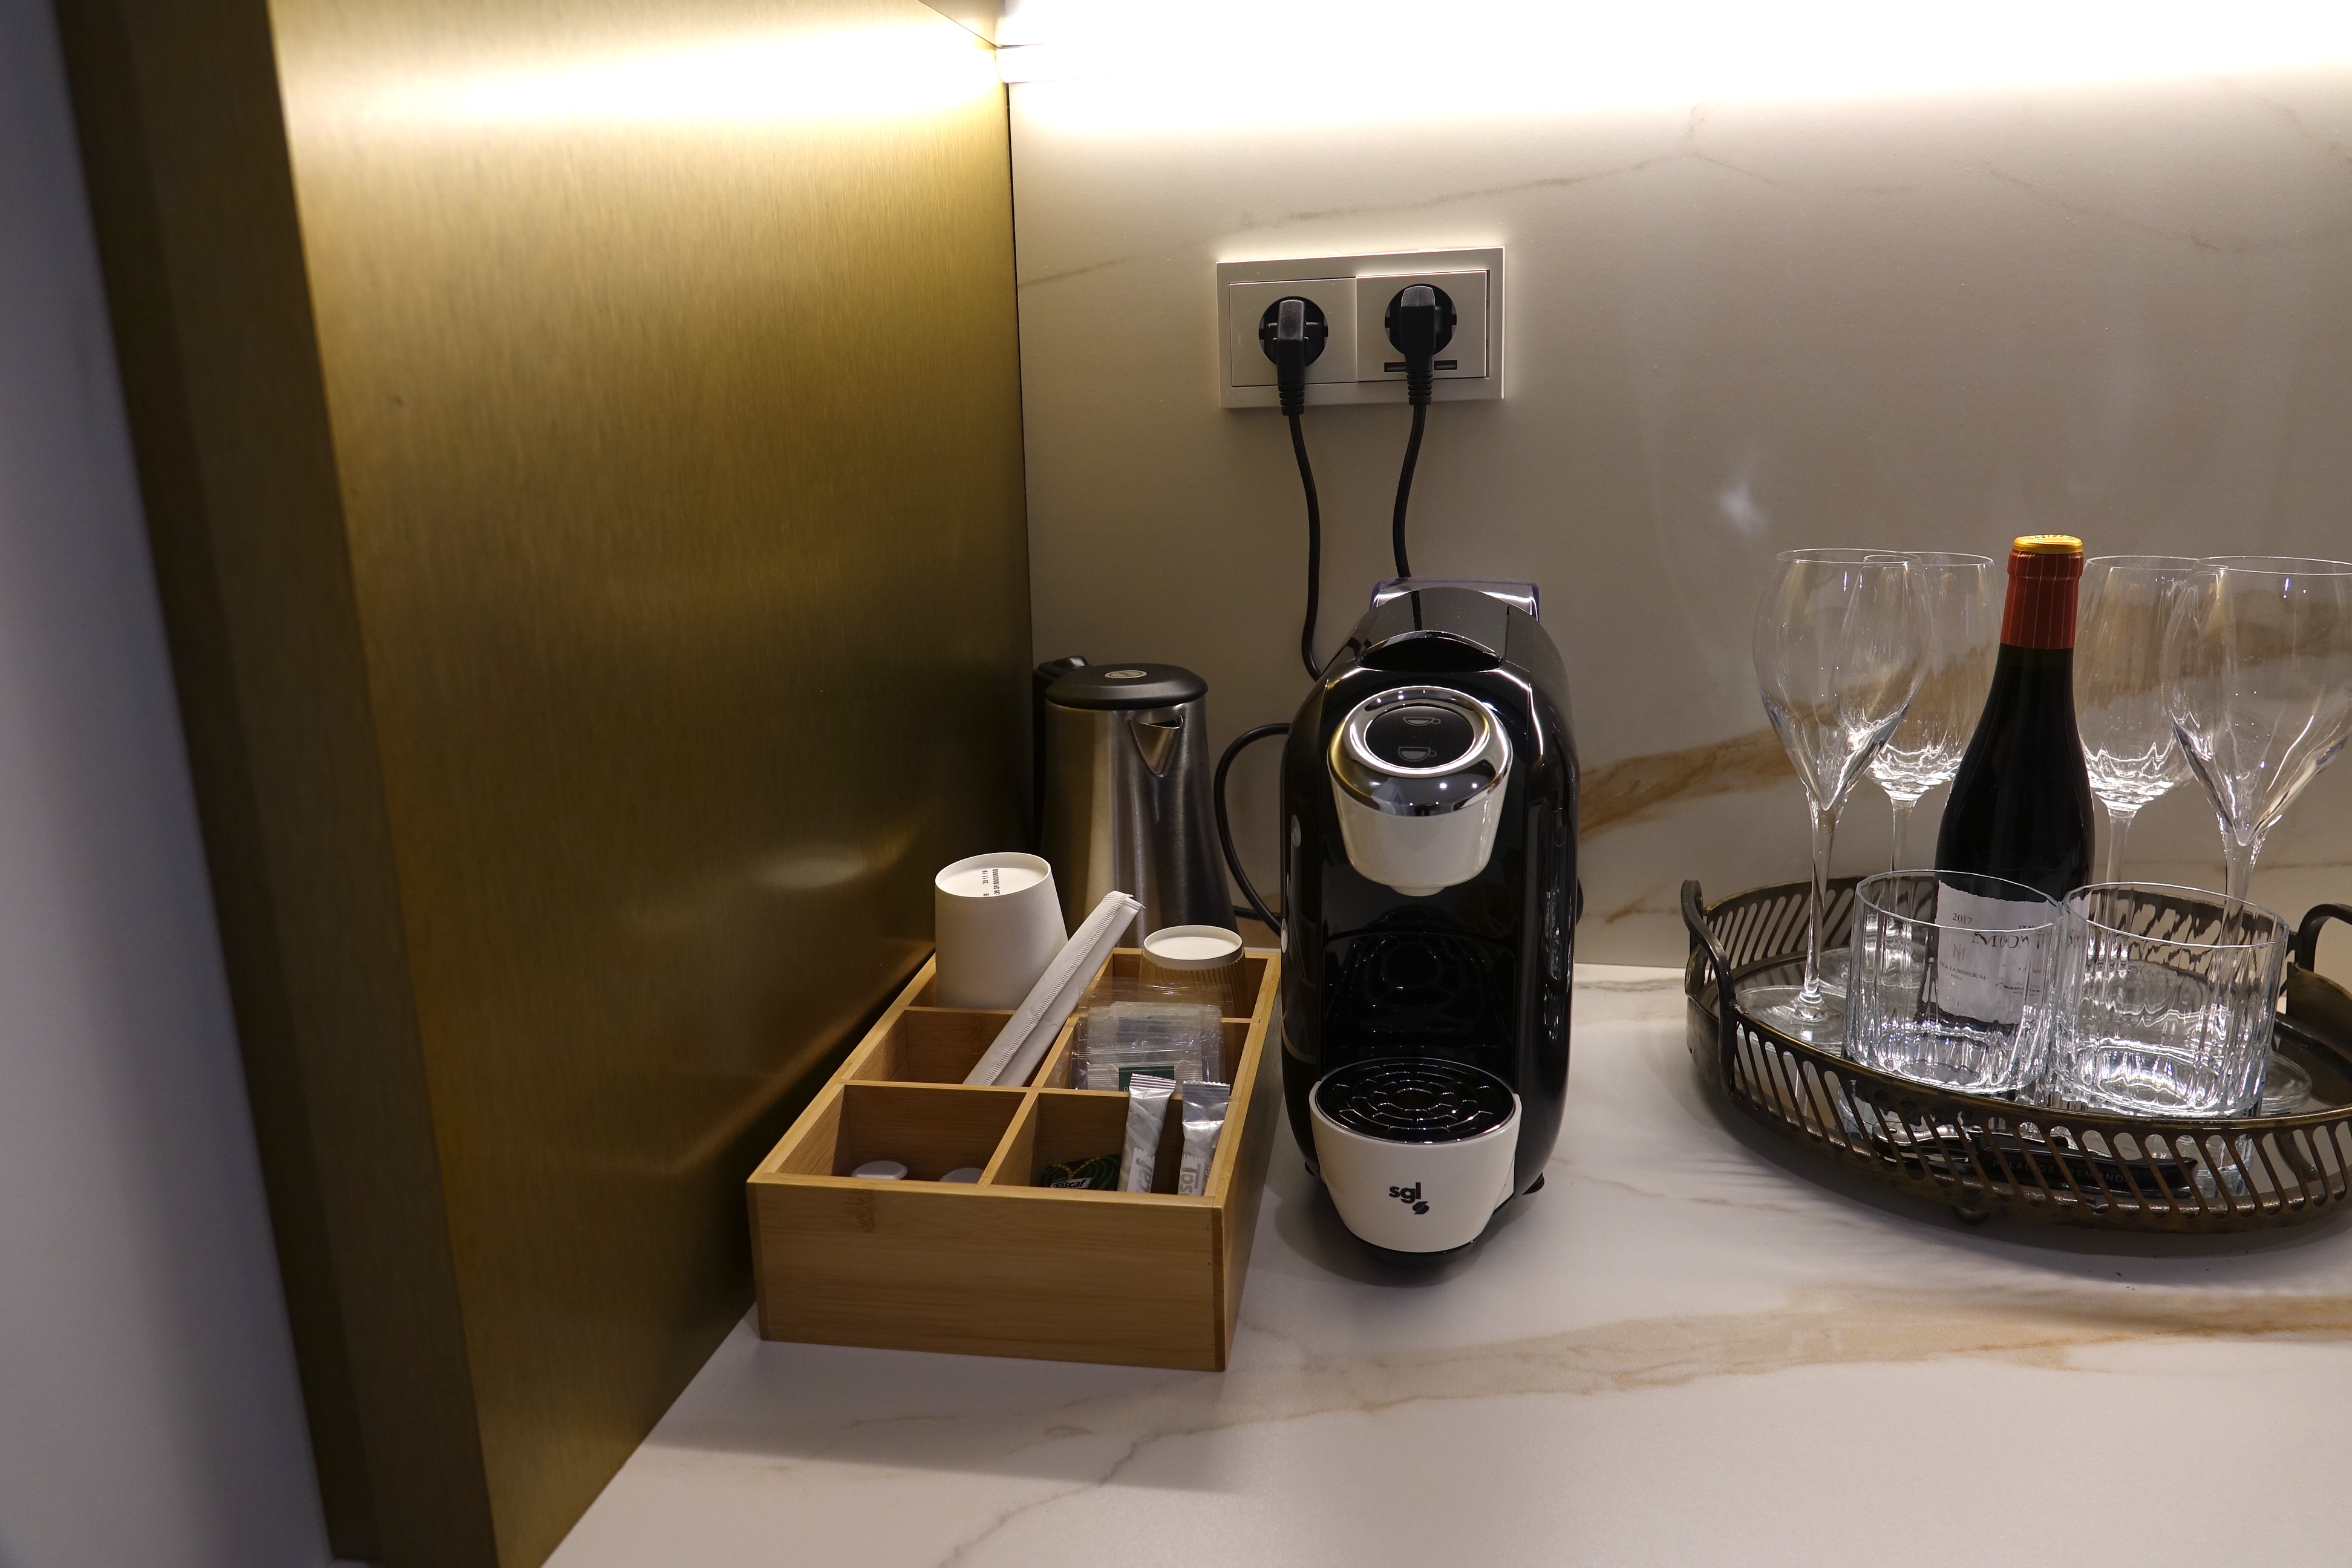 a coffee machine and wine glasses on a counter